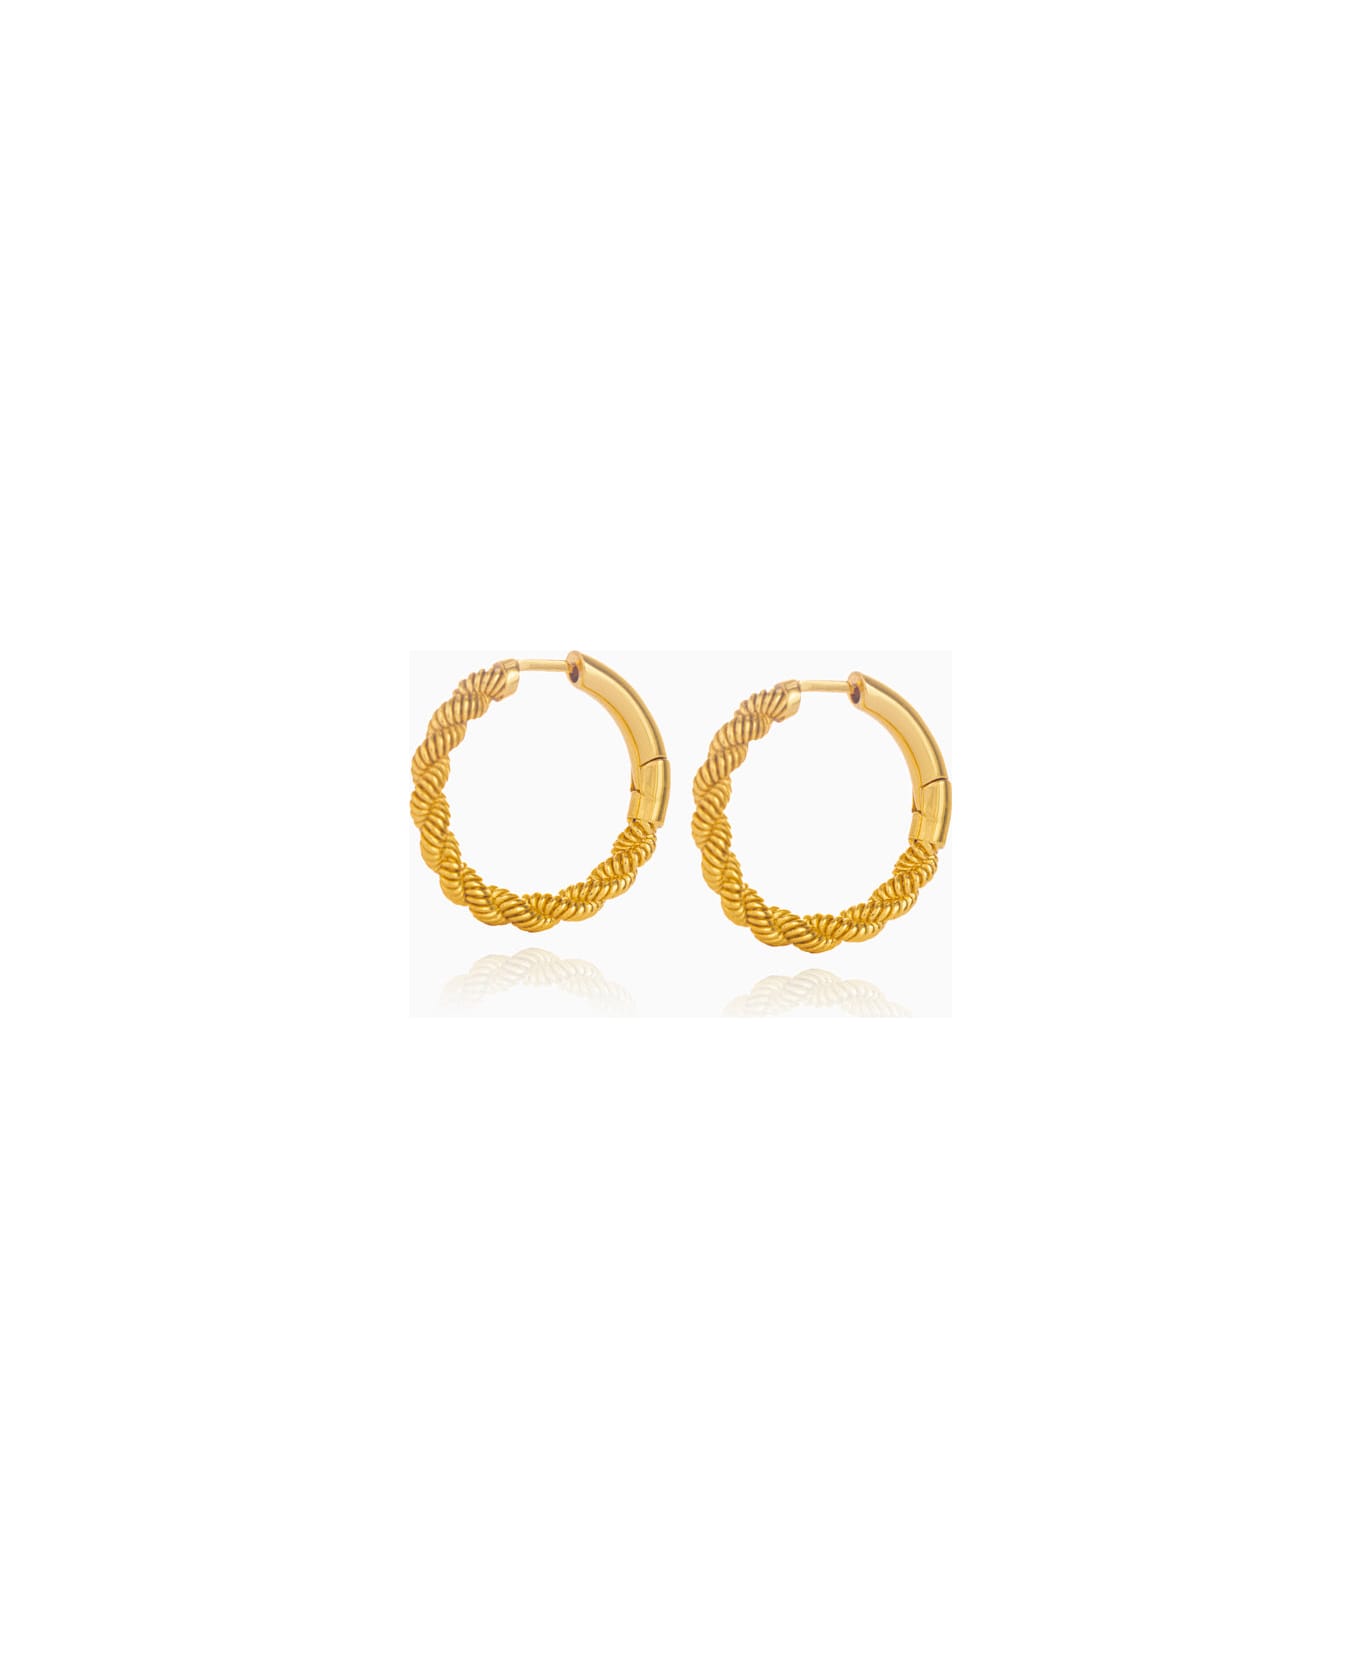 Federica Tosi Earring Round Grace Gold - Gold イヤリング